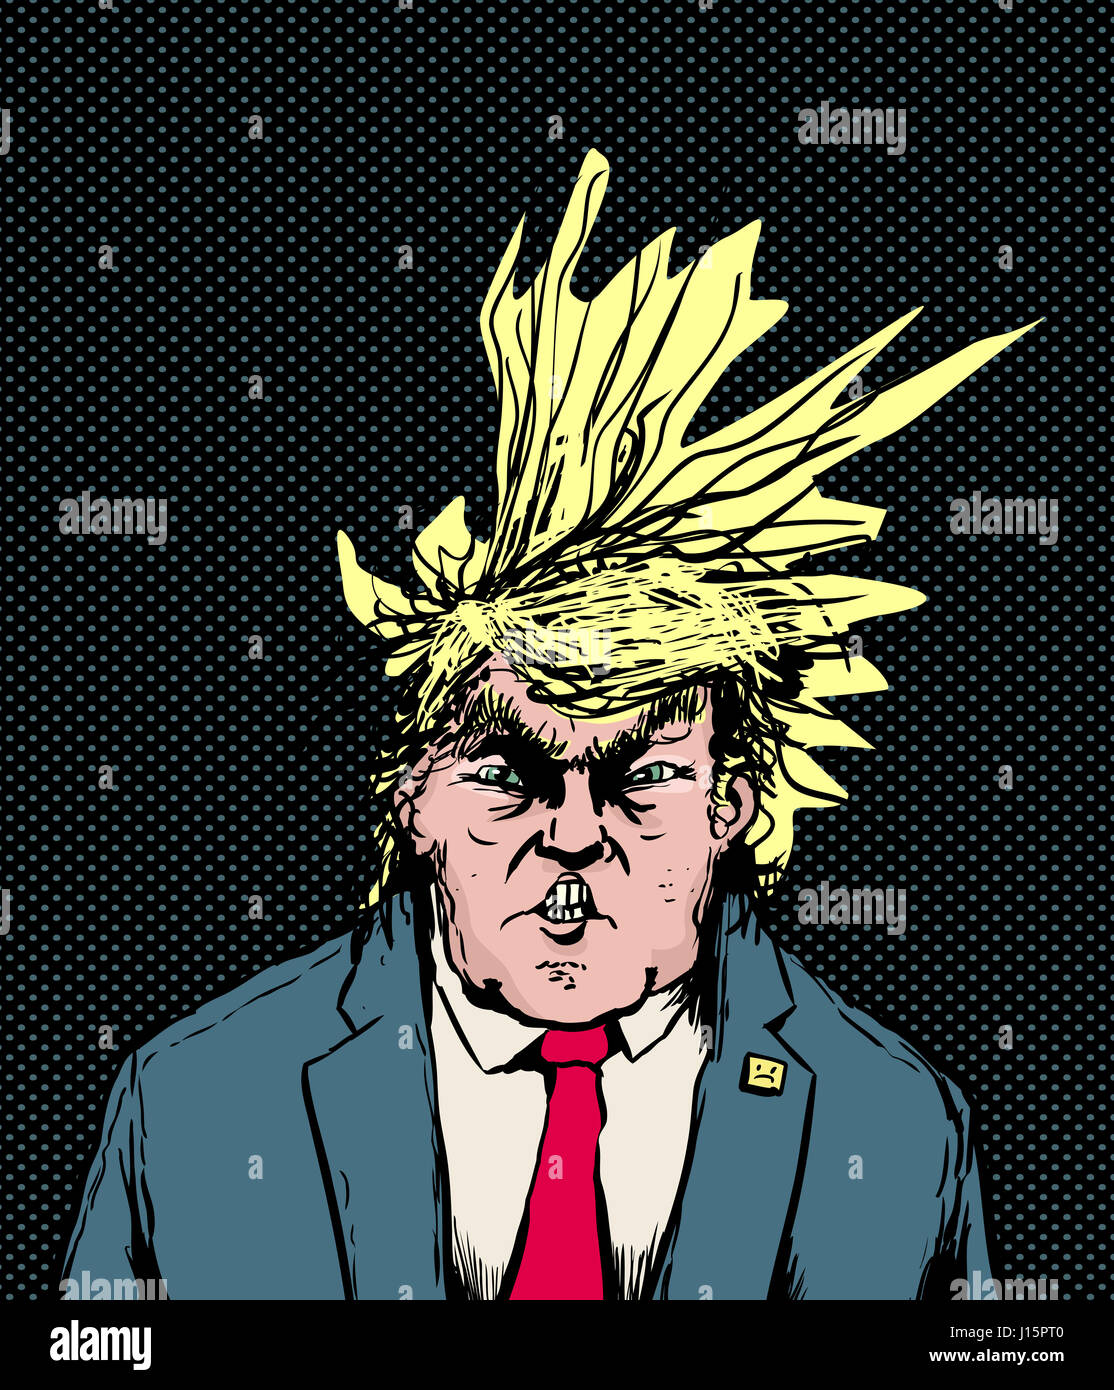 April 18, 2017. Illustration of Donald Trump with clenched teeth and messy hair blowing diagonally Stock Photo